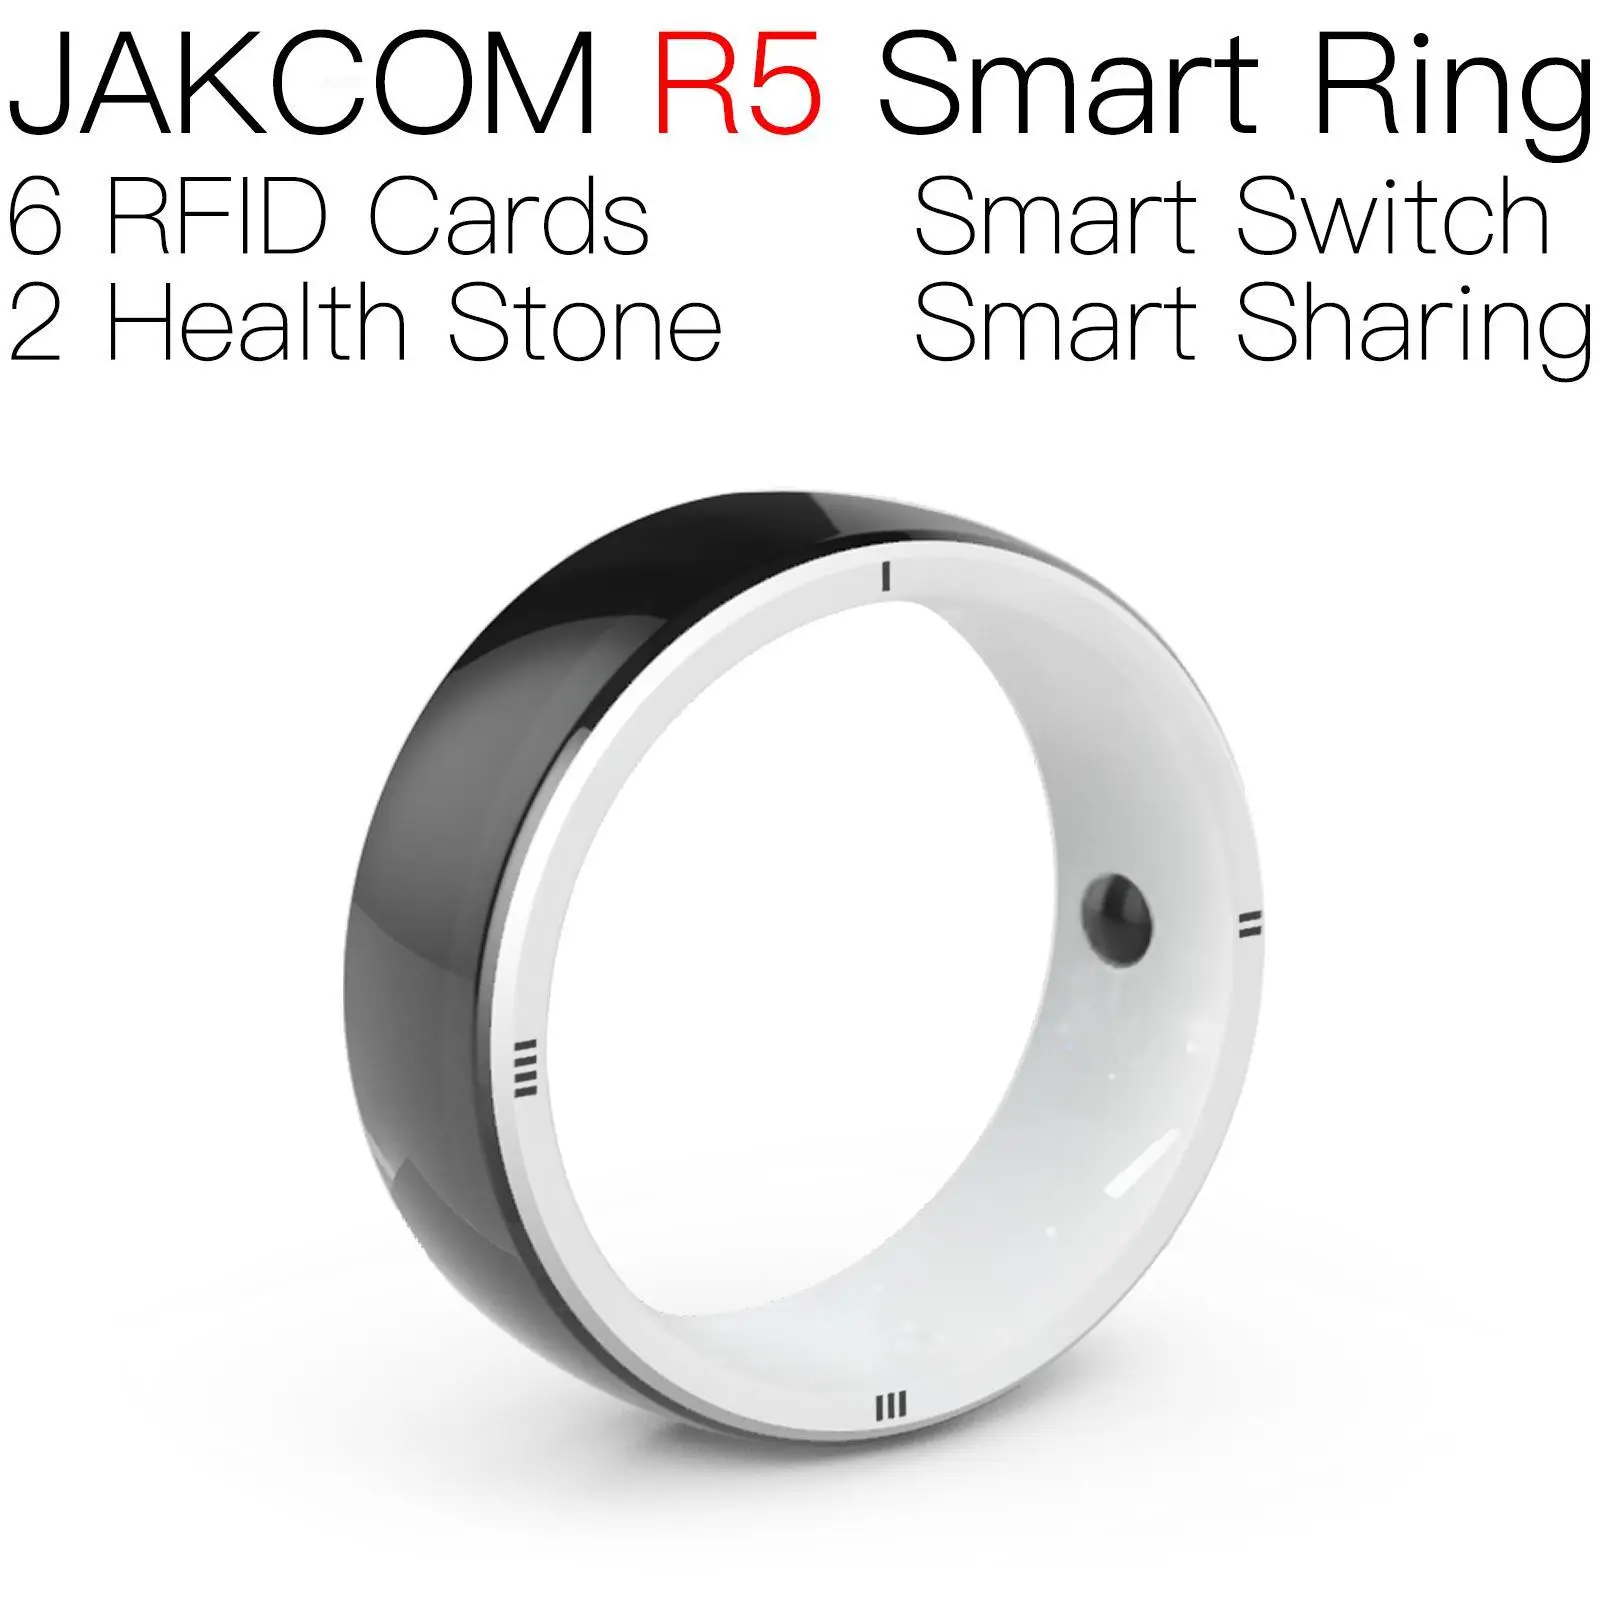 

JAKCOM R5 Smart Ring New arrival as support tag opamp chip anti metal rfid tags baby nfc ring pigeon customize proximity card